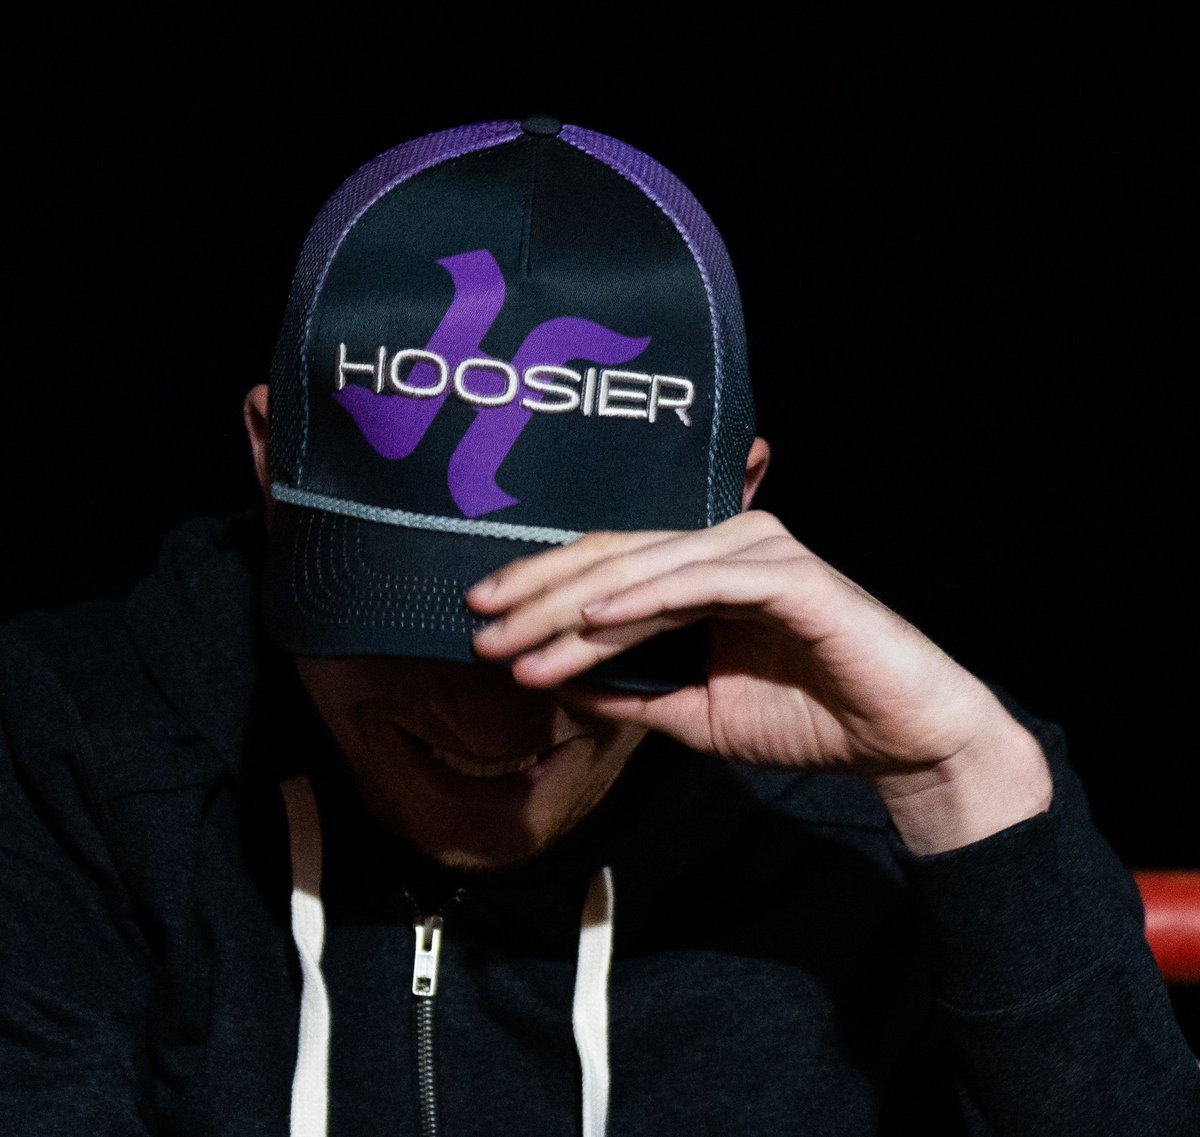 Hoosier hat game STRONG 🔥 Grab your new Hoosier hat here: bit.ly/3Y2pXl7